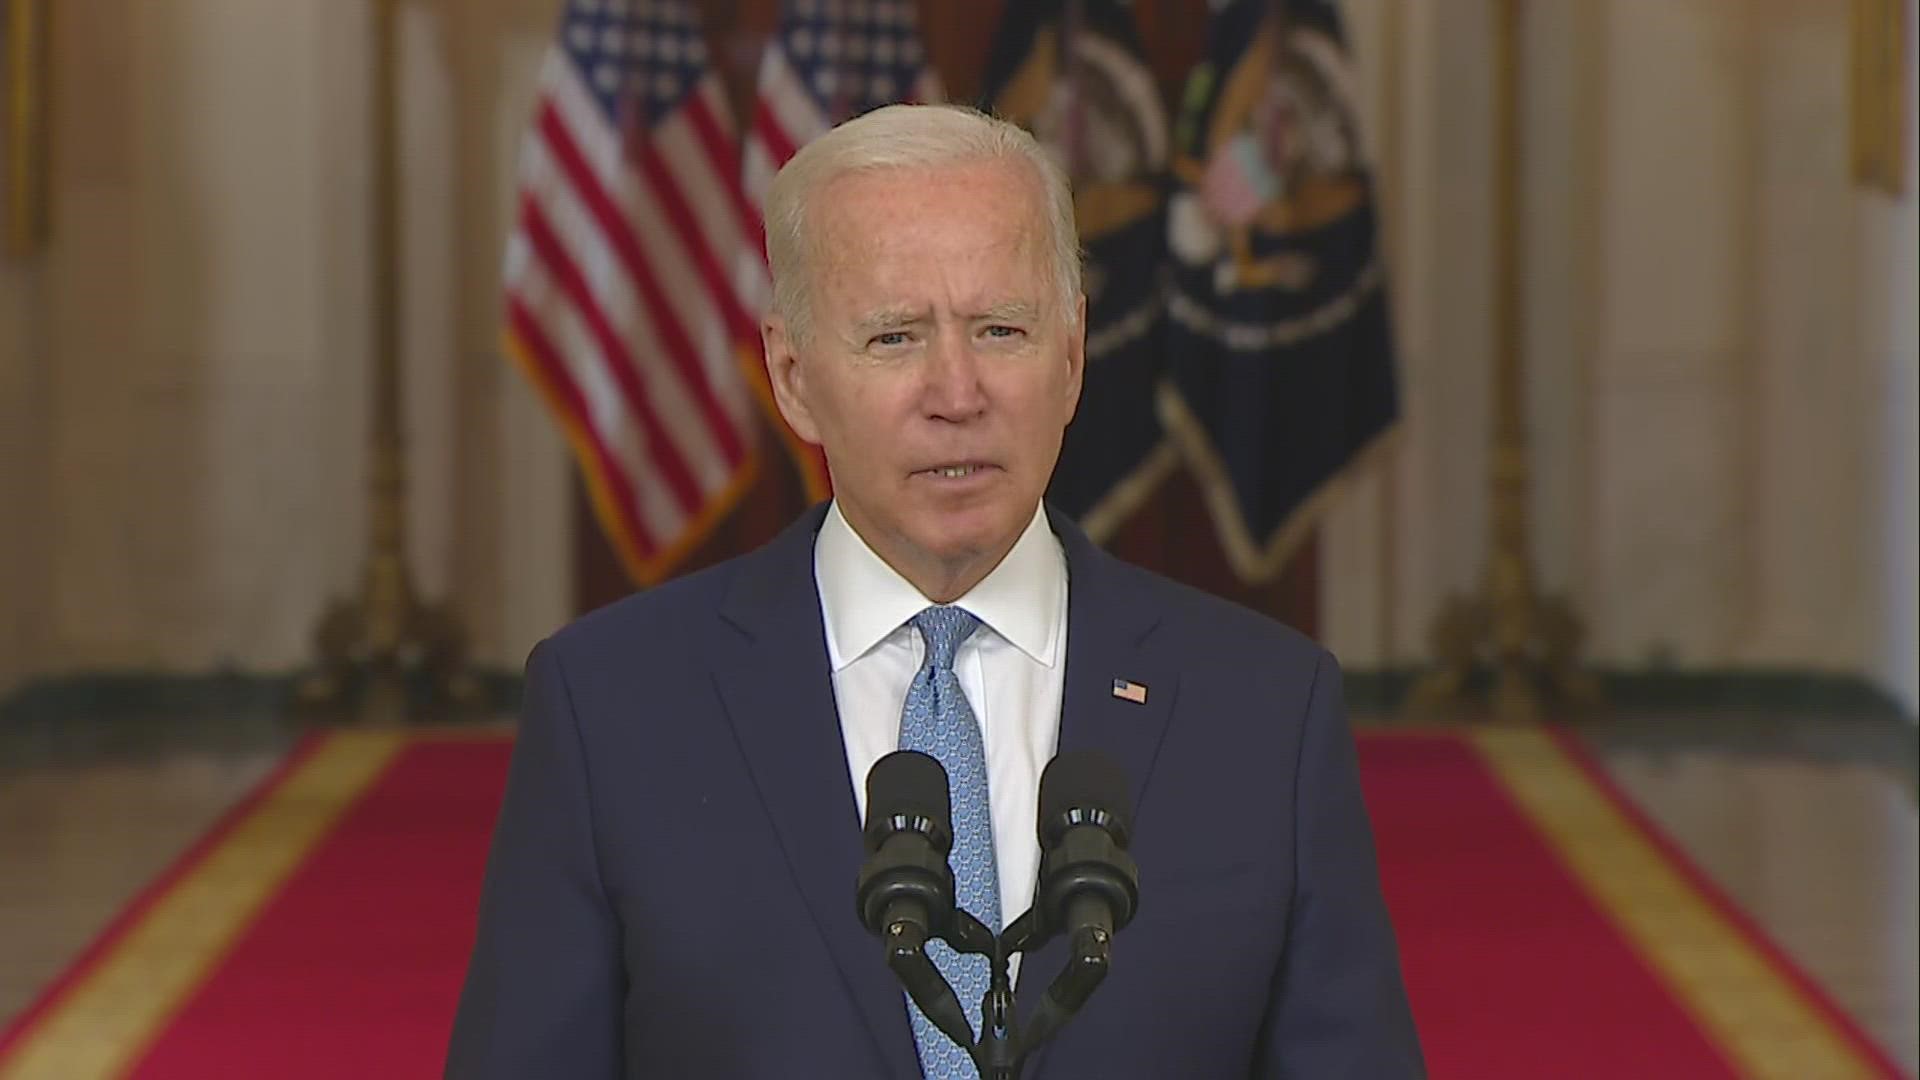 President Joe Biden said Tuesday he takes full responsibility for the decision to end the Afghanistan war and to pull all U.S. military members out by Aug. 31.